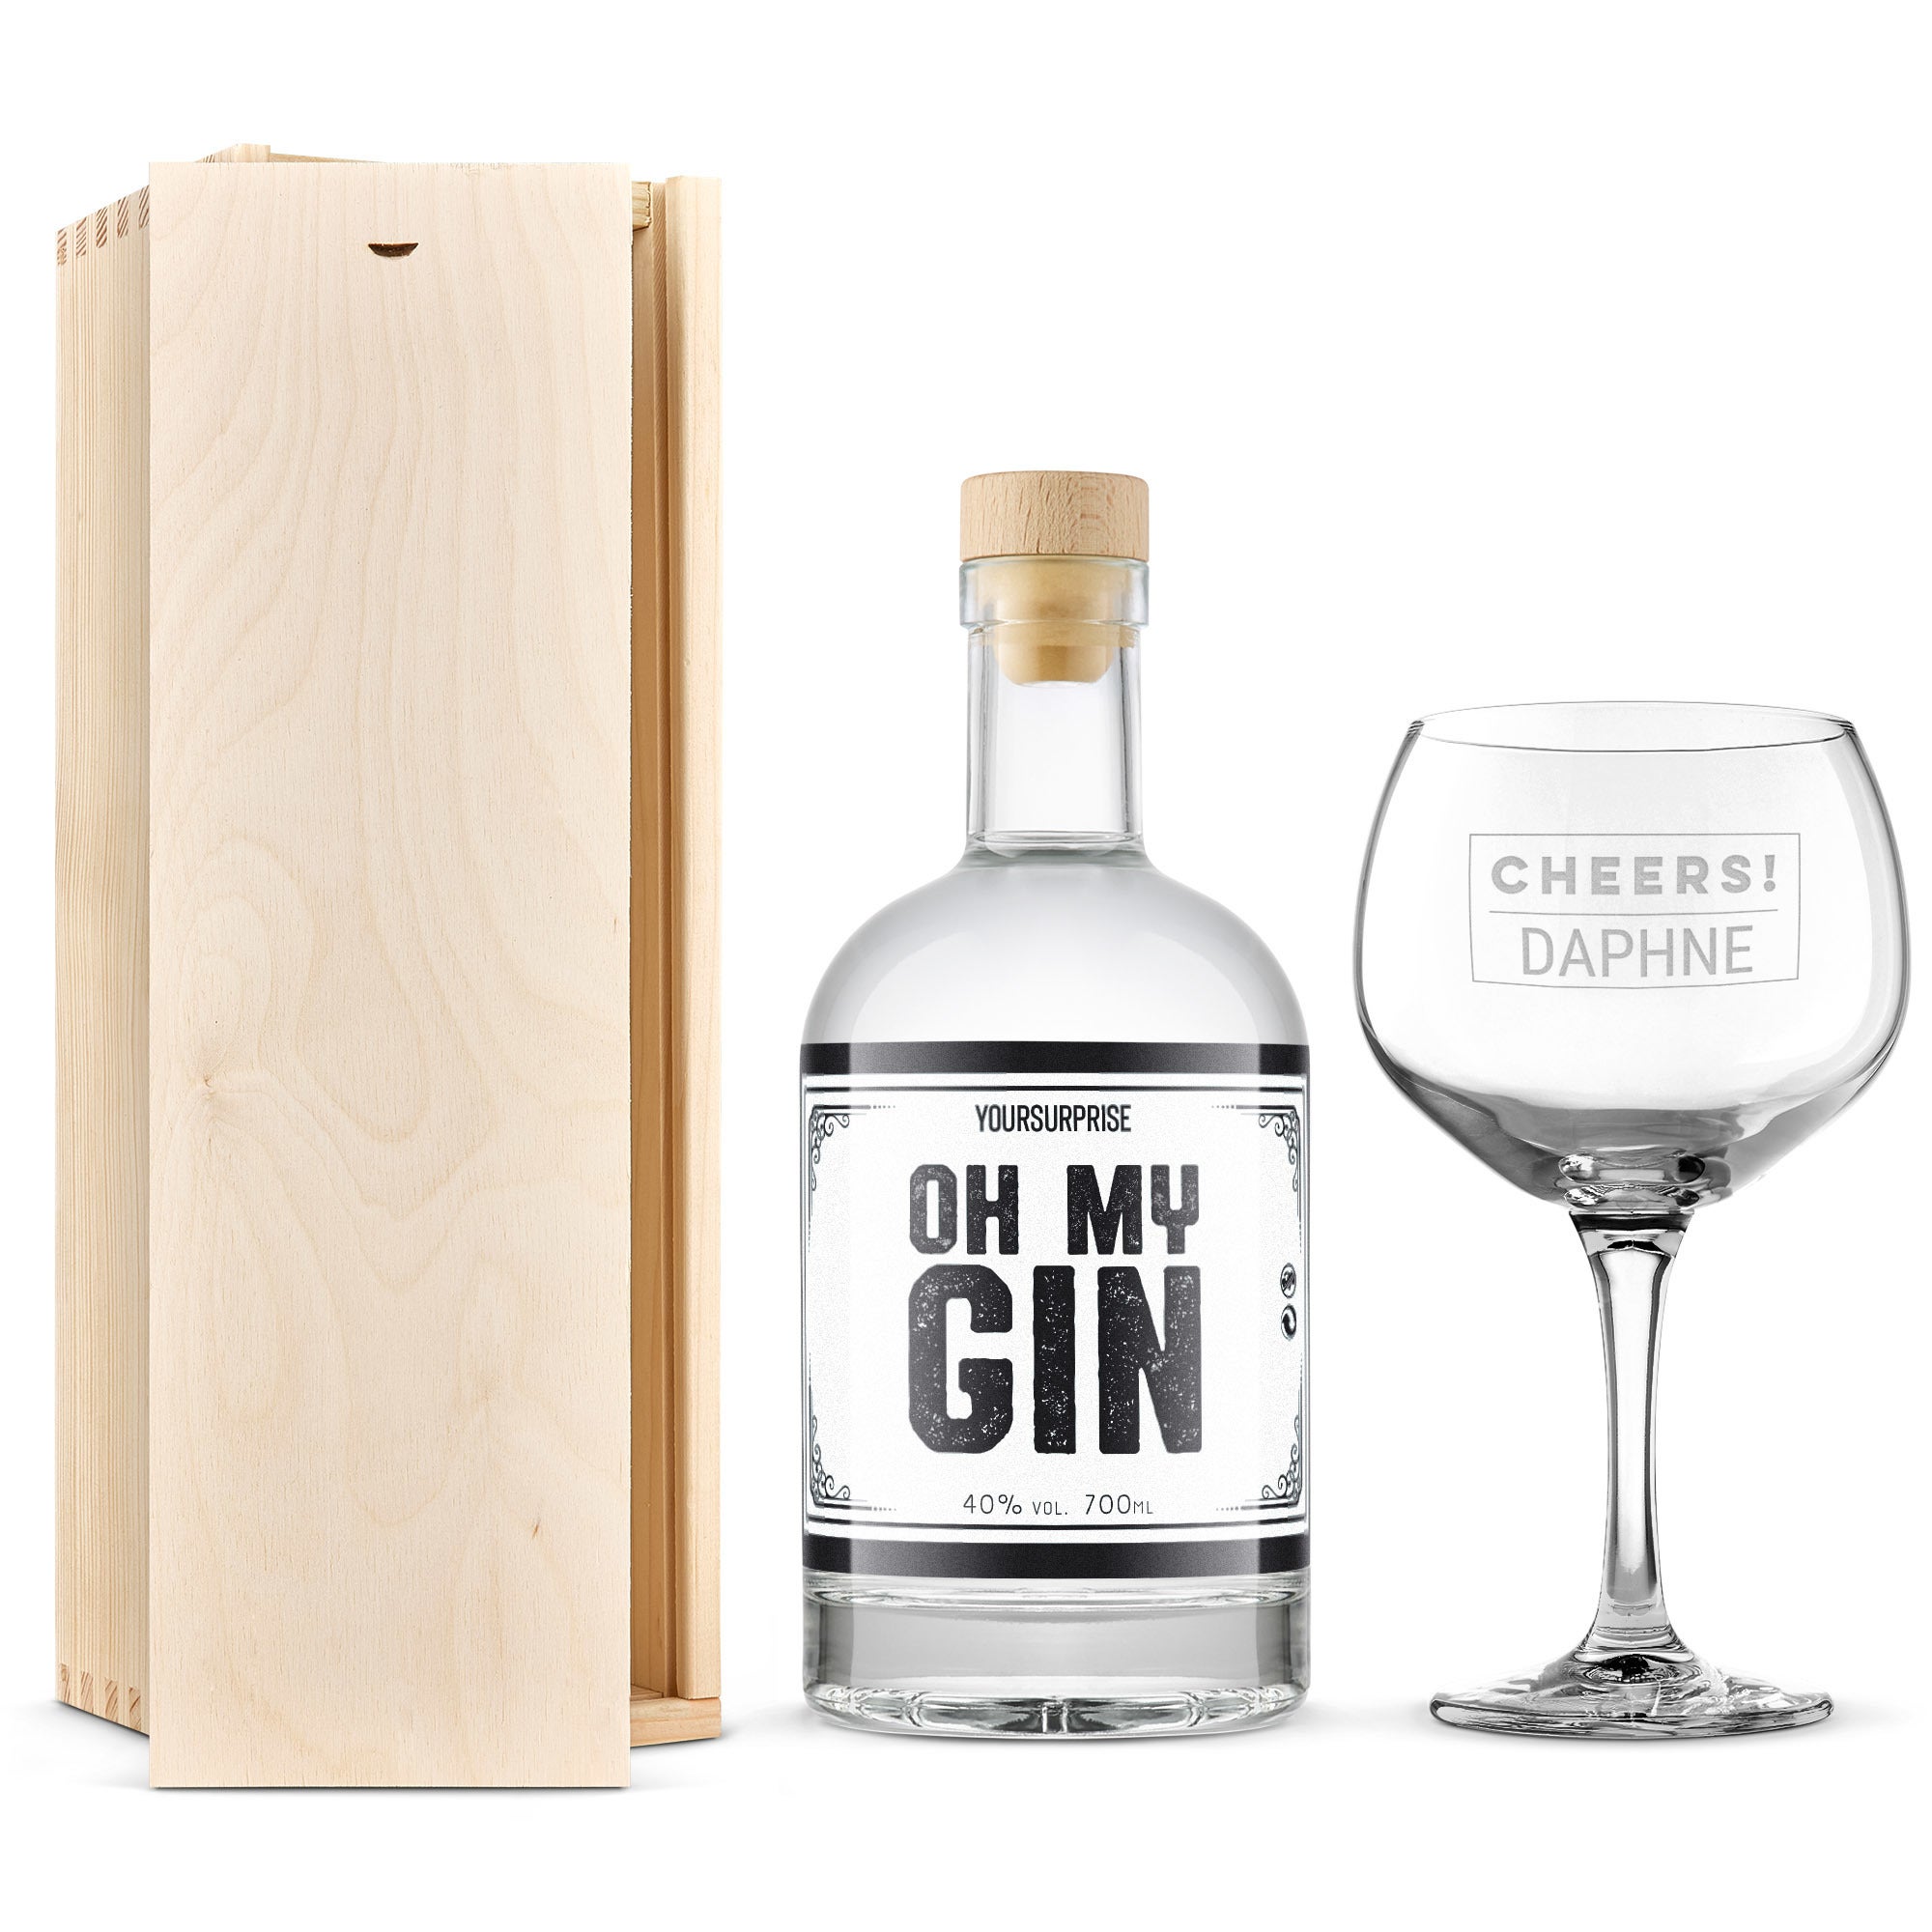 Personalised gin gift - YourSurprise - Engraved glass